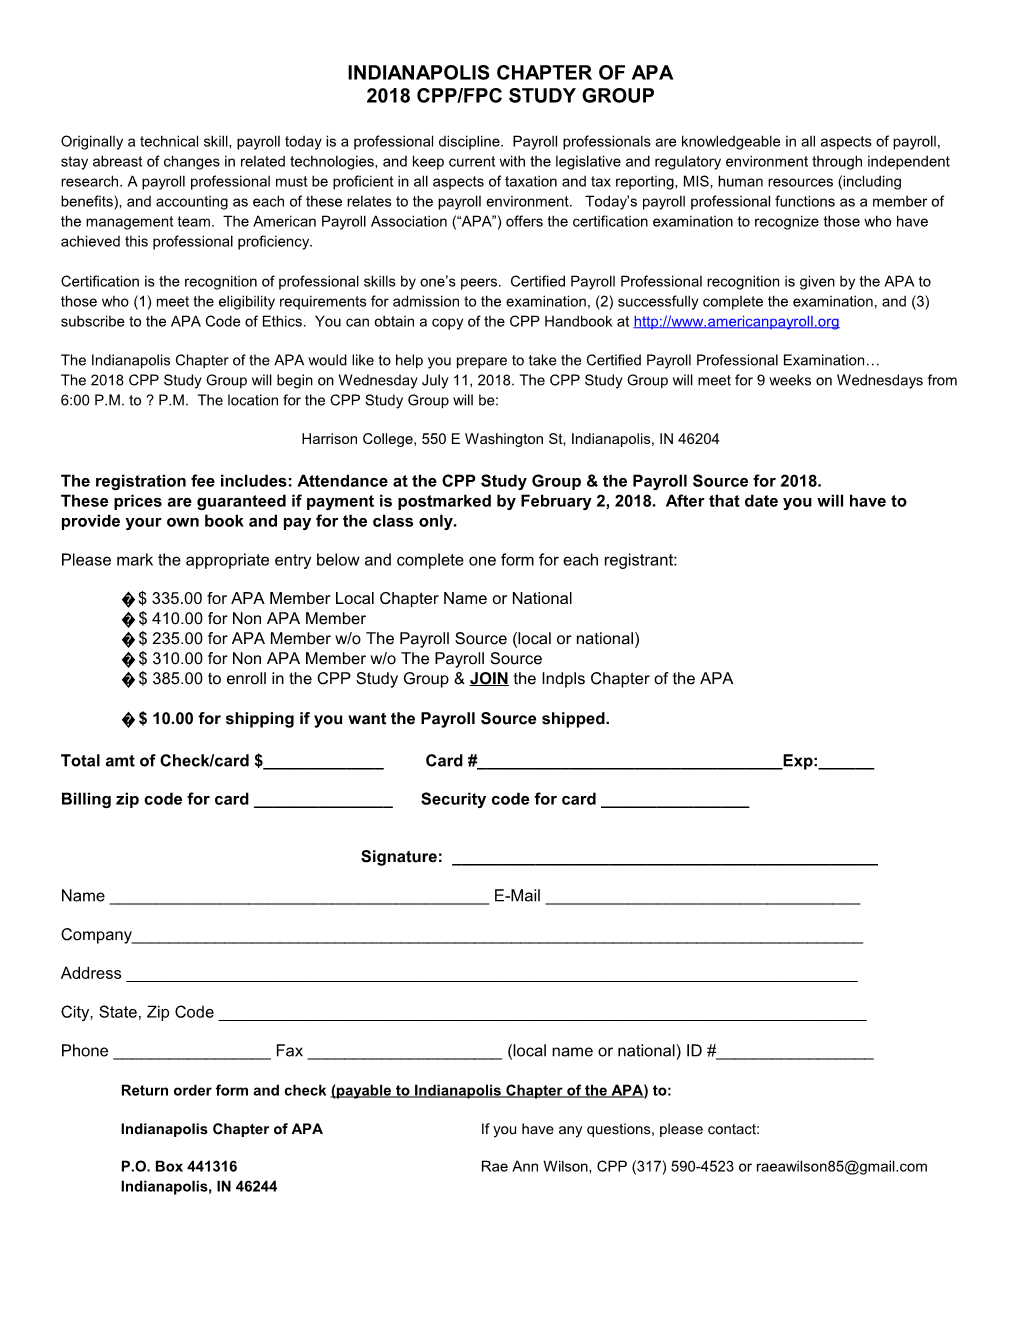 2005 CPP Study Group Registration Form